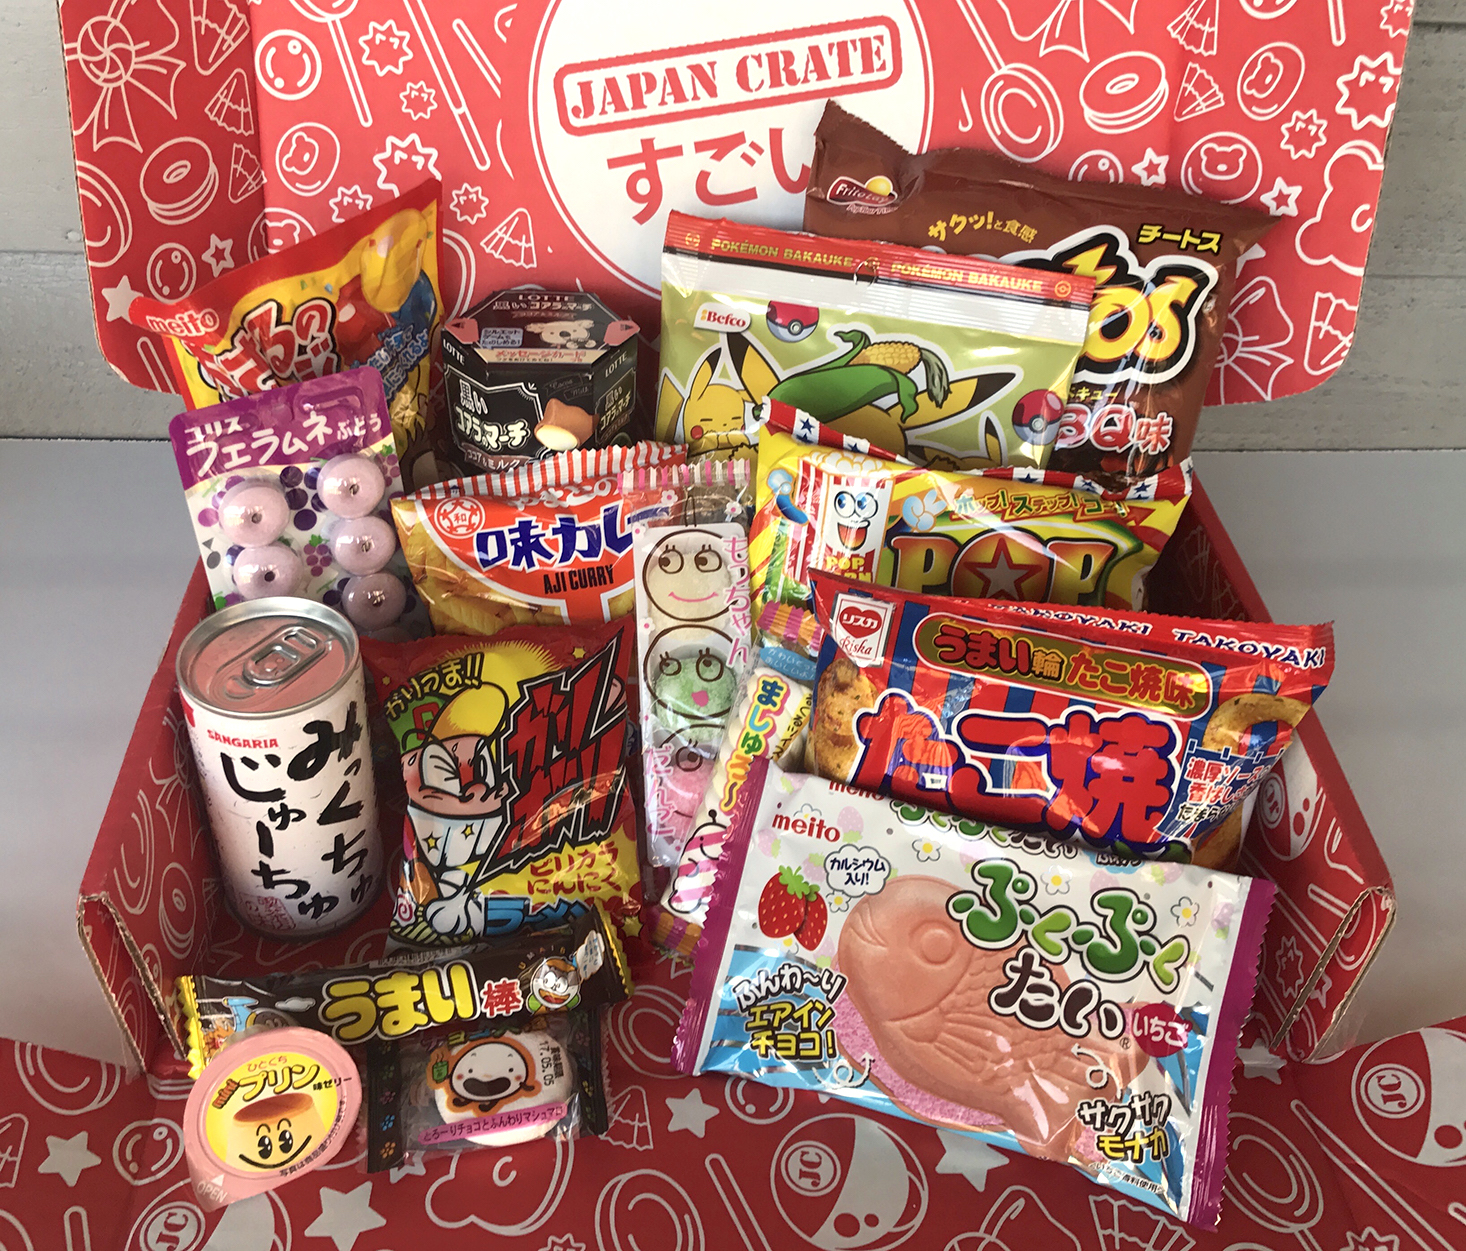 Japan-Crate-February-2017-Review